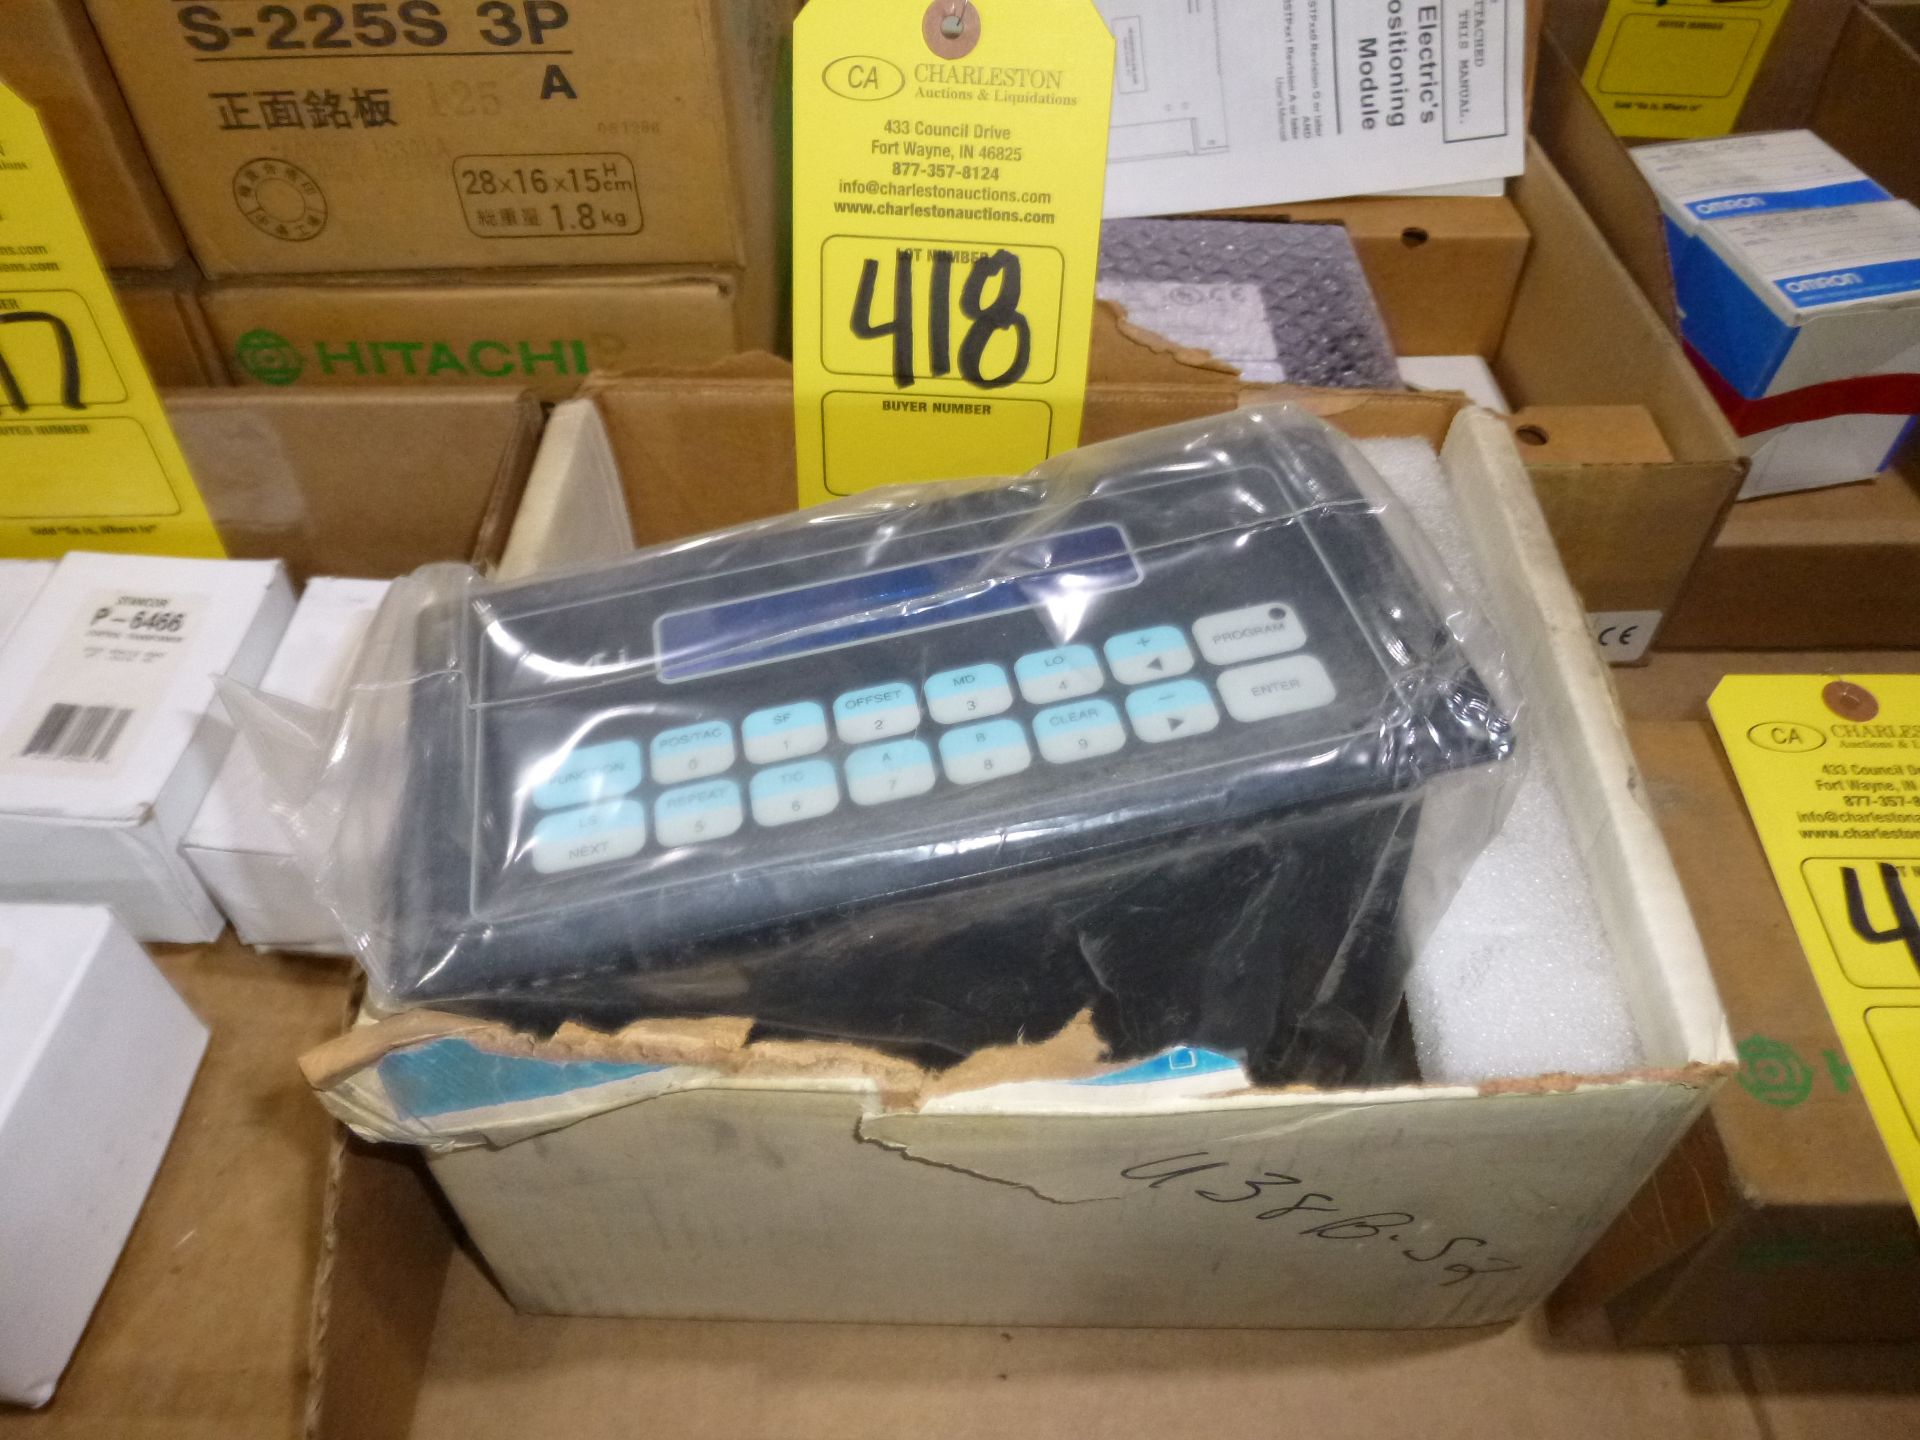 Advanced Micro Controls Inc Model iPLC-2-3, new in box, as always with Brolyn LLC auctions, all lots